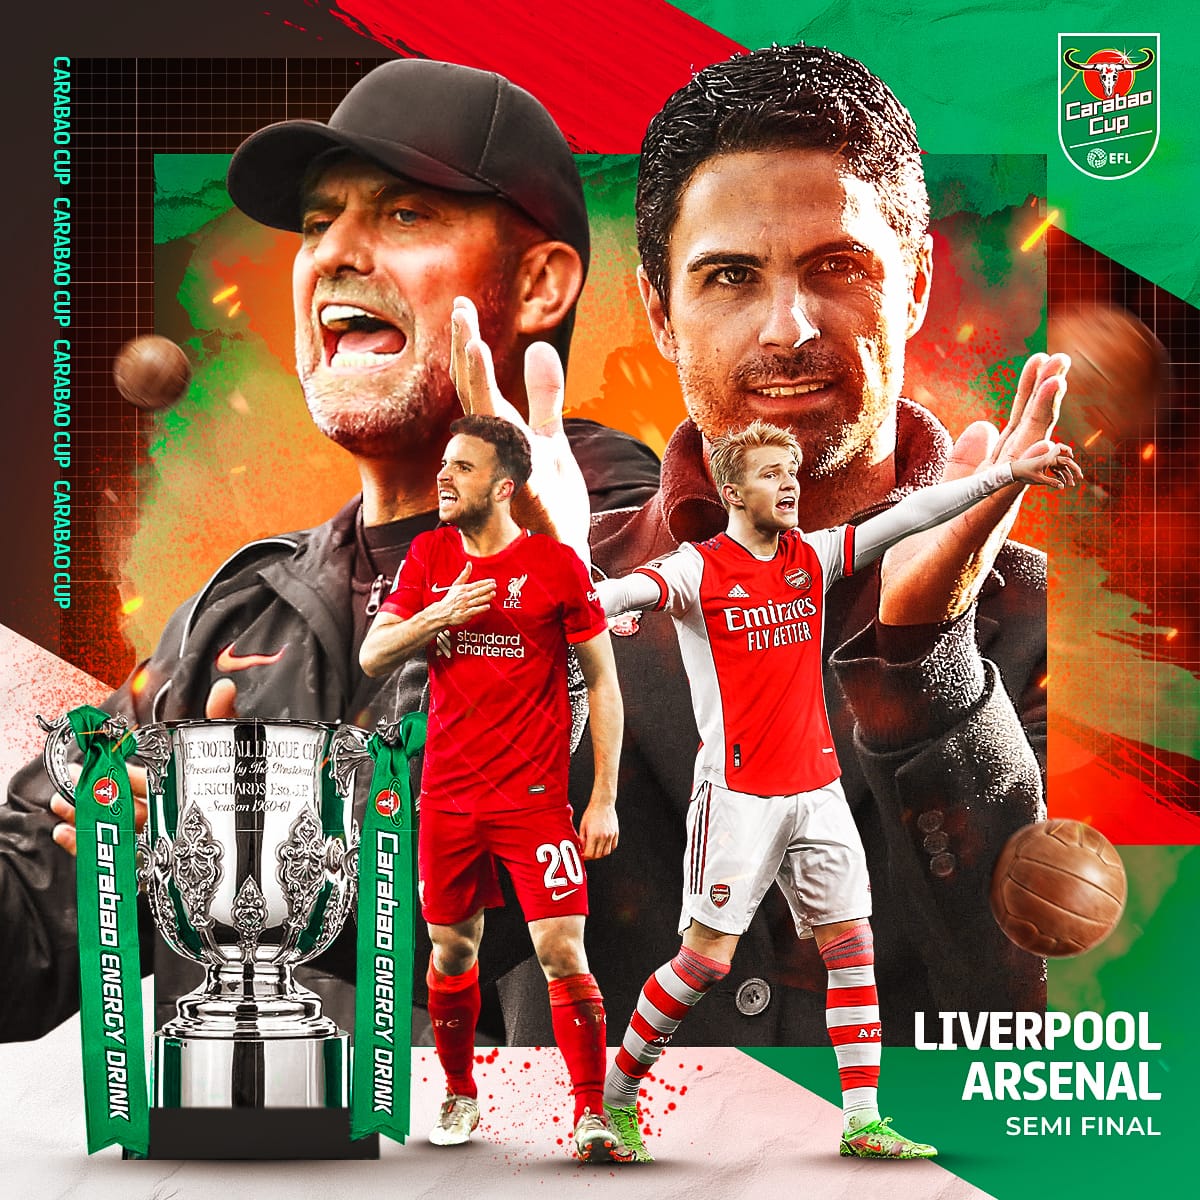 2021-22 EFL - Carabao Cup Semi Finals - ChelseavsSpurs and LiverpoolvsArsenal - Preview, Stats, Live Updates - Football